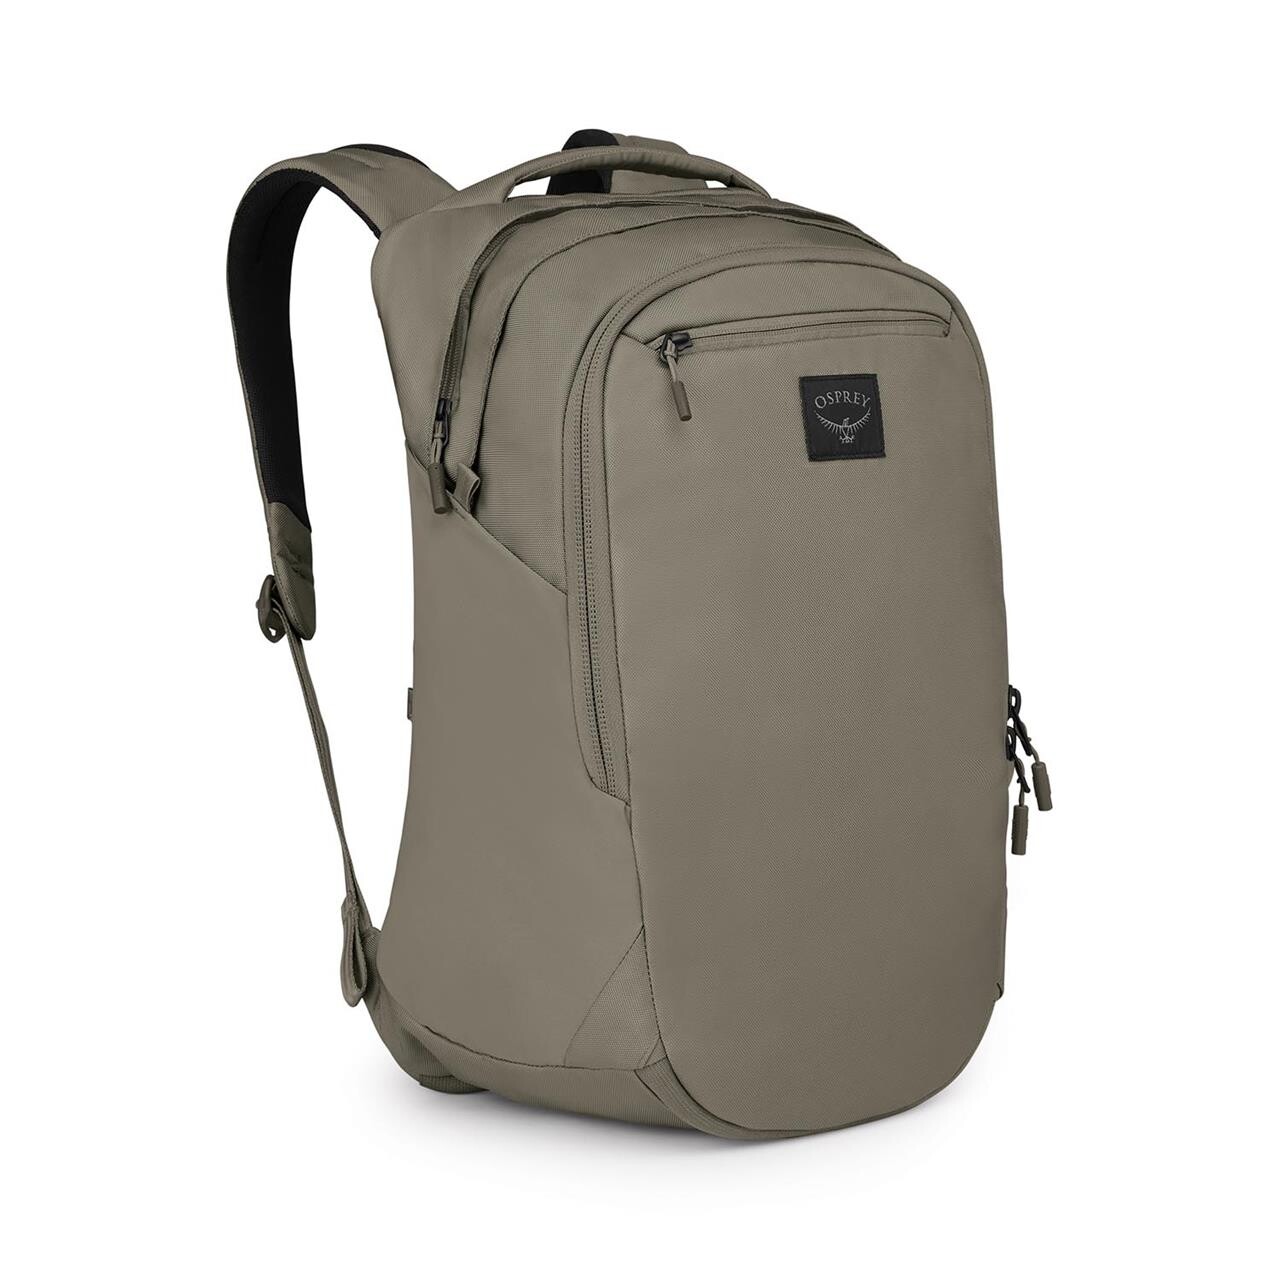 Osprey Aoede Airspeed Backpack 20 (BEIGE (TAN CONCRETE) ONE SIZE)